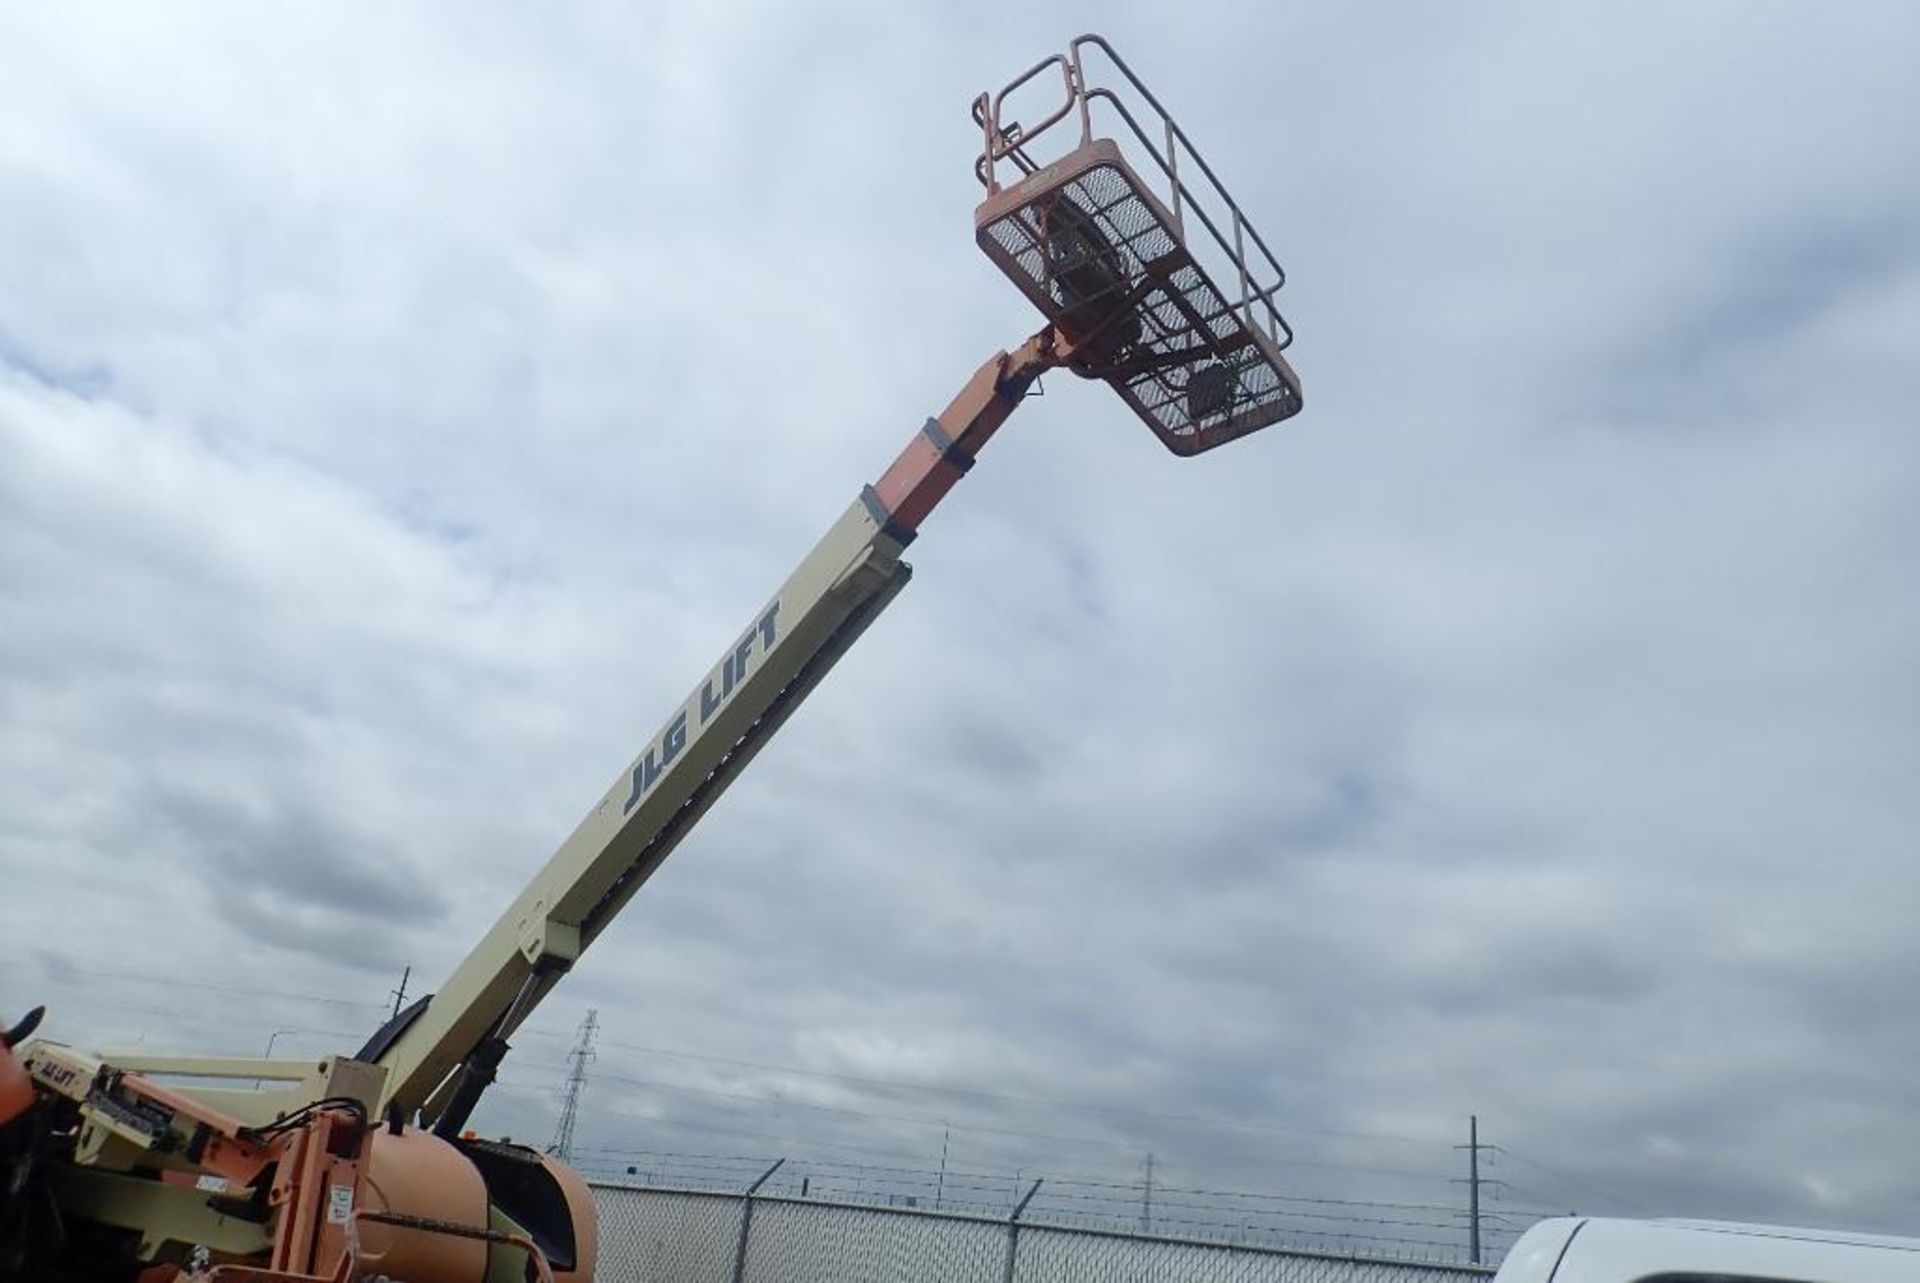 2005 JLG 600S 4WD Boom Lift. SN 0300083236. **LOCATED AT 14017-52 STREET NE** - Image 10 of 22